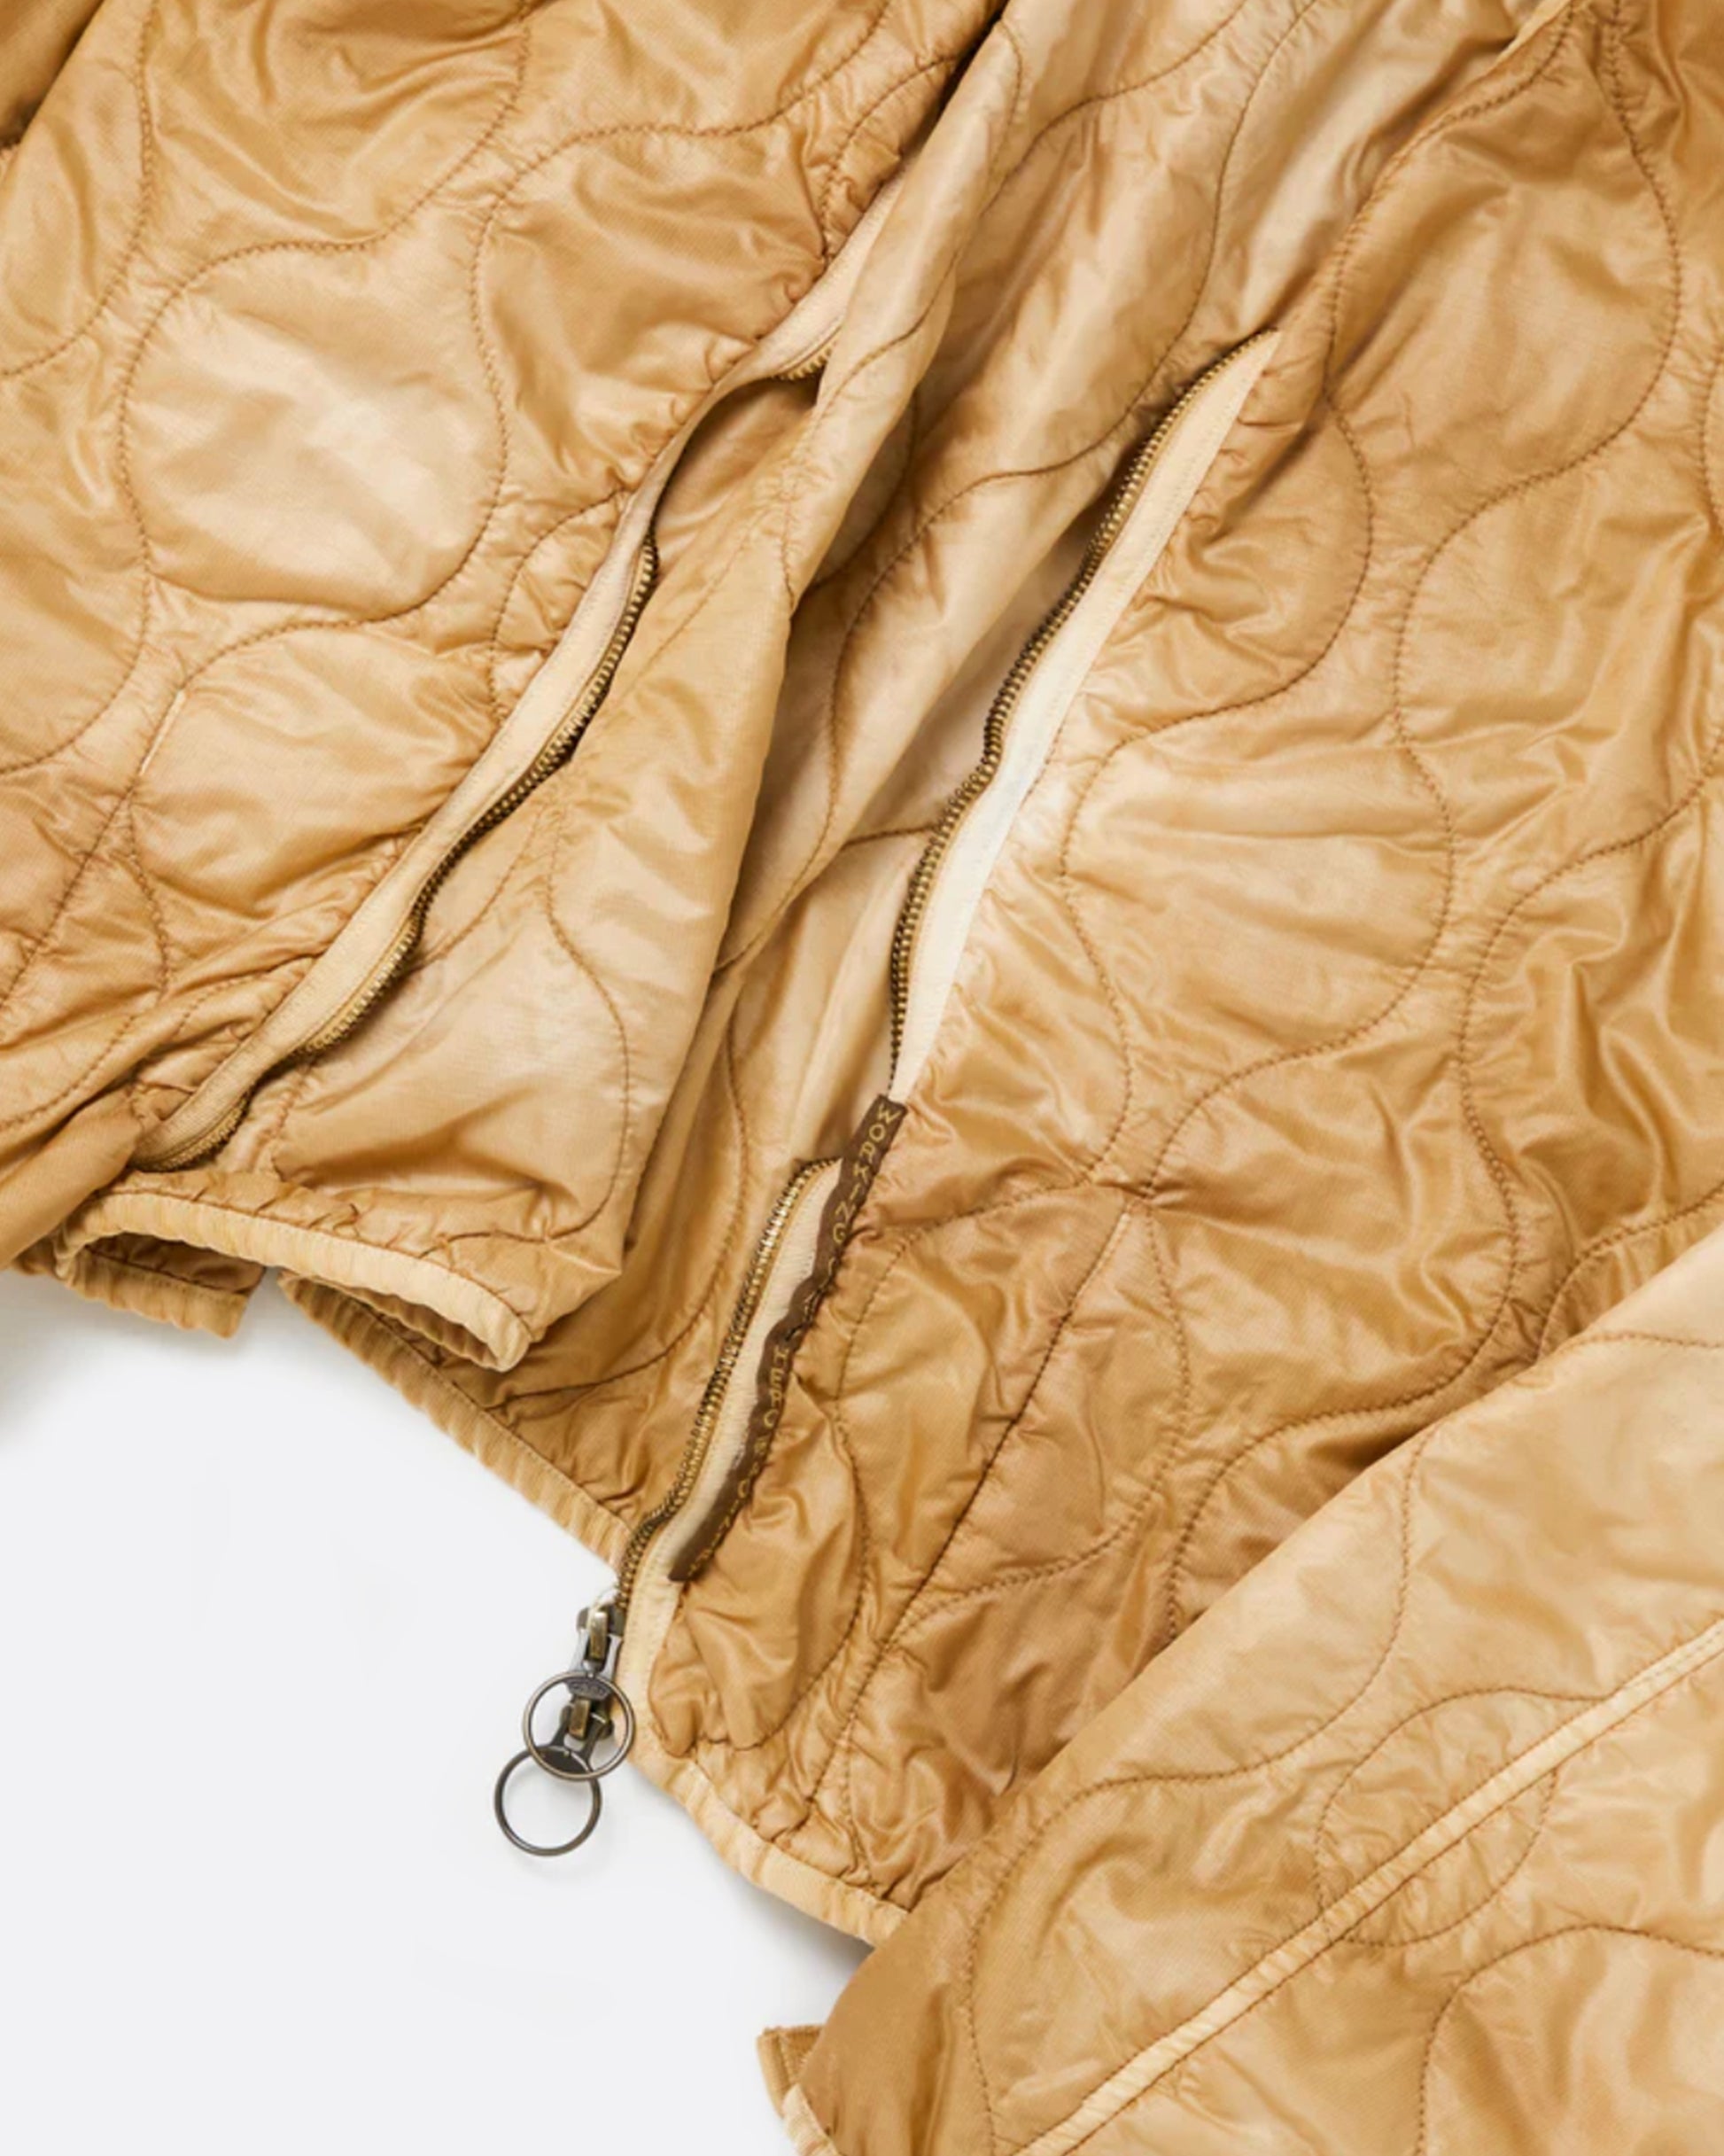 A nylon, quilted, dip-dyed bolero jacket in a golden brown - great for layering!